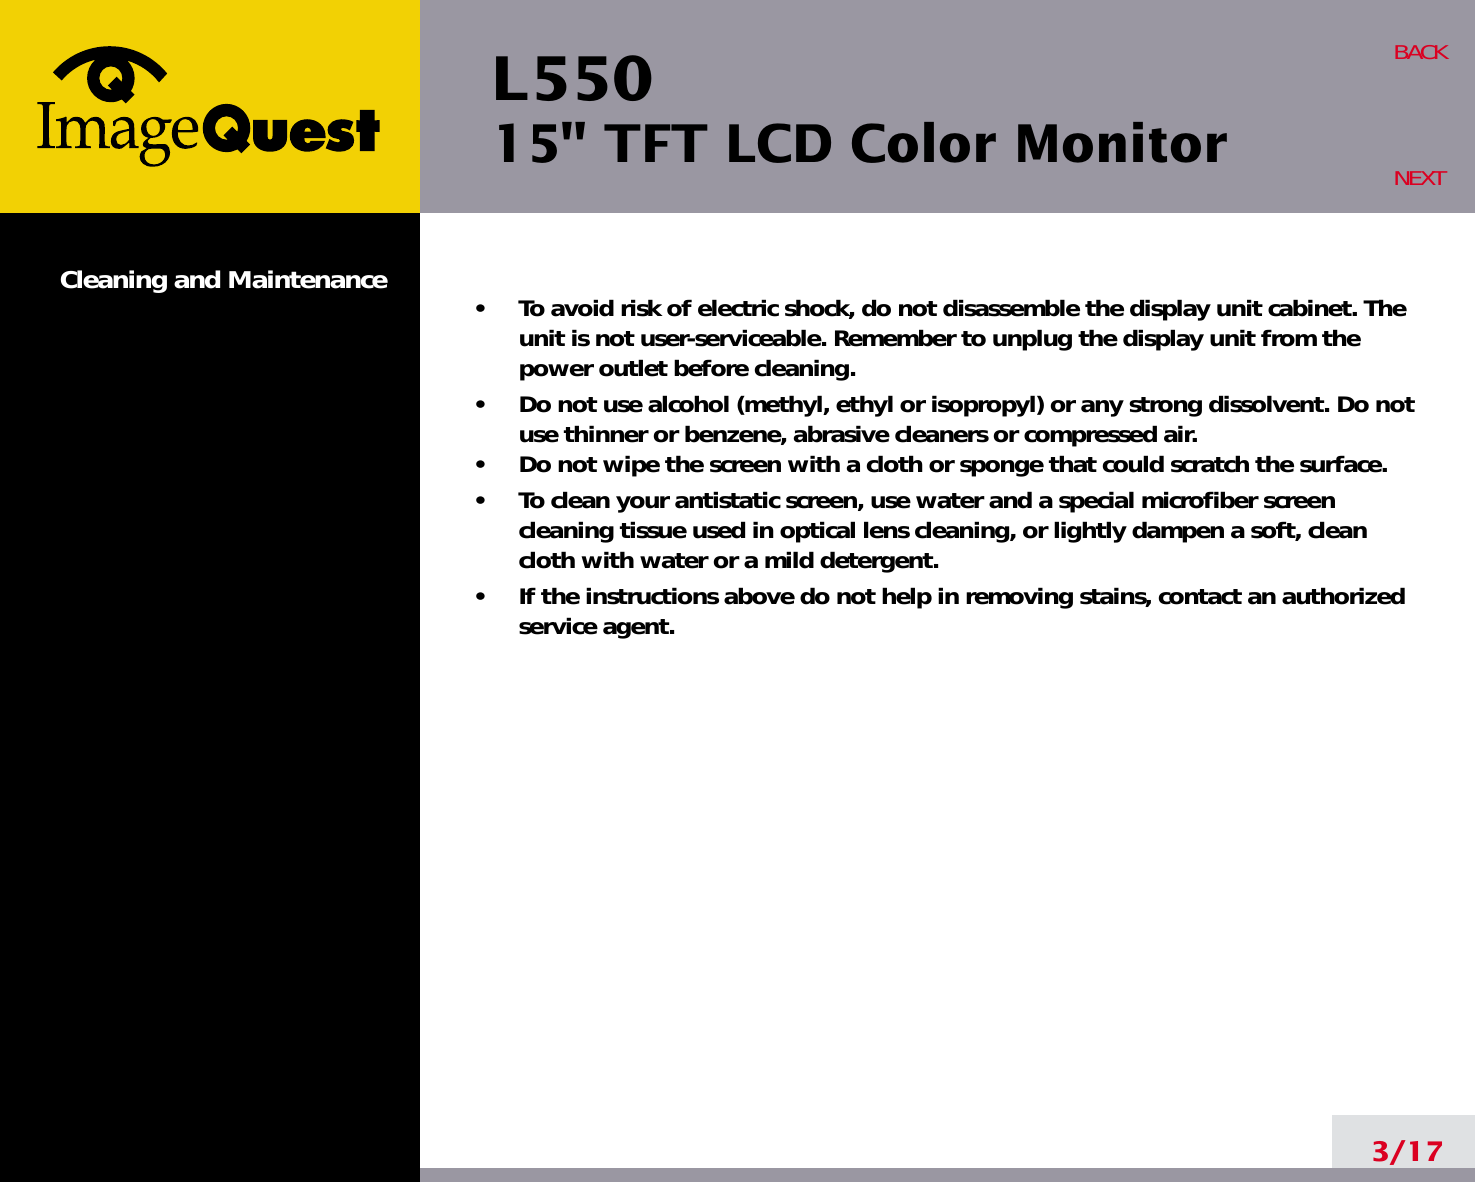 L550 15&quot; TFT LCD Color MonitorCleaning and Maintenance •     To avoid risk of electric shock, do not disassemble the display unit cabinet. Theunit is not user-serviceable. Remember to unplug the display unit from thepower outlet before cleaning.•     Do not use alcohol (methyl, ethyl or isopropyl) or any strong dissolvent. Do notuse thinner or benzene, abrasive cleaners or compressed air.•     Do not wipe the screen with a cloth or sponge that could scratch the surface.•     To clean your antistatic screen, use water and a special microfiber screencleaning tissue used in optical lens cleaning, or lightly dampen a soft, cleancloth with water or a mild detergent.•     If the instructions above do not help in removing stains, contact an authorizedservice agent. 3/17BACKNEXT